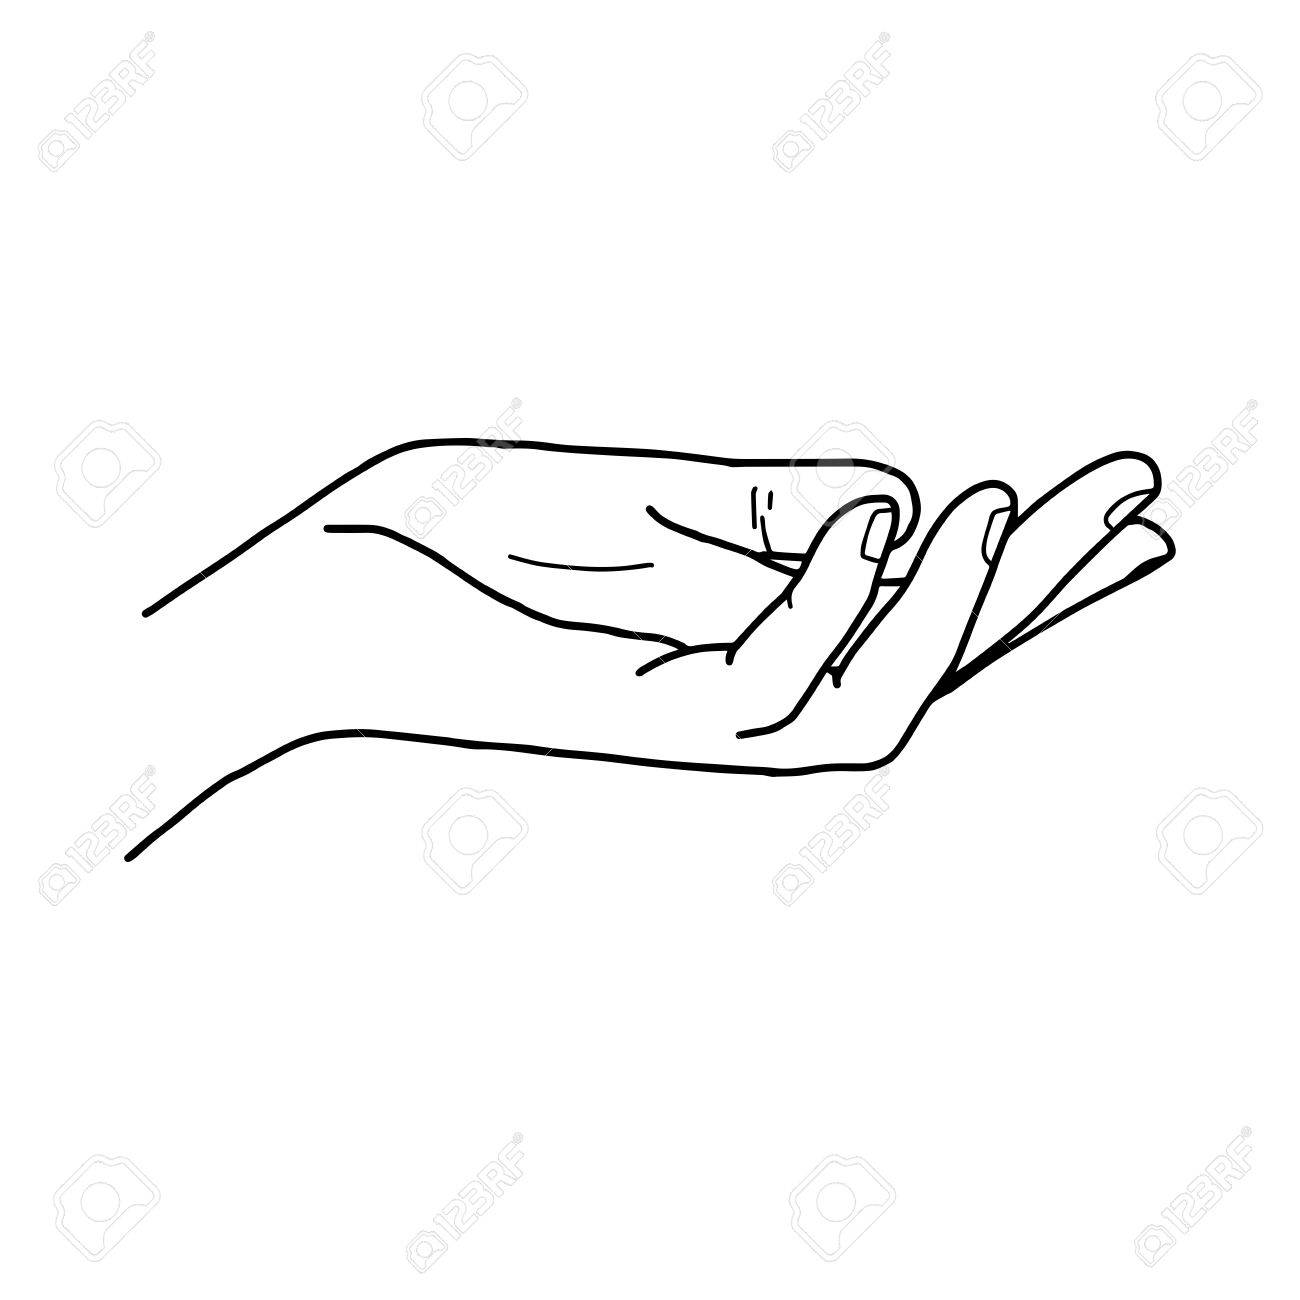 Top How To Draw Cupped Hands in the world Check it out now 